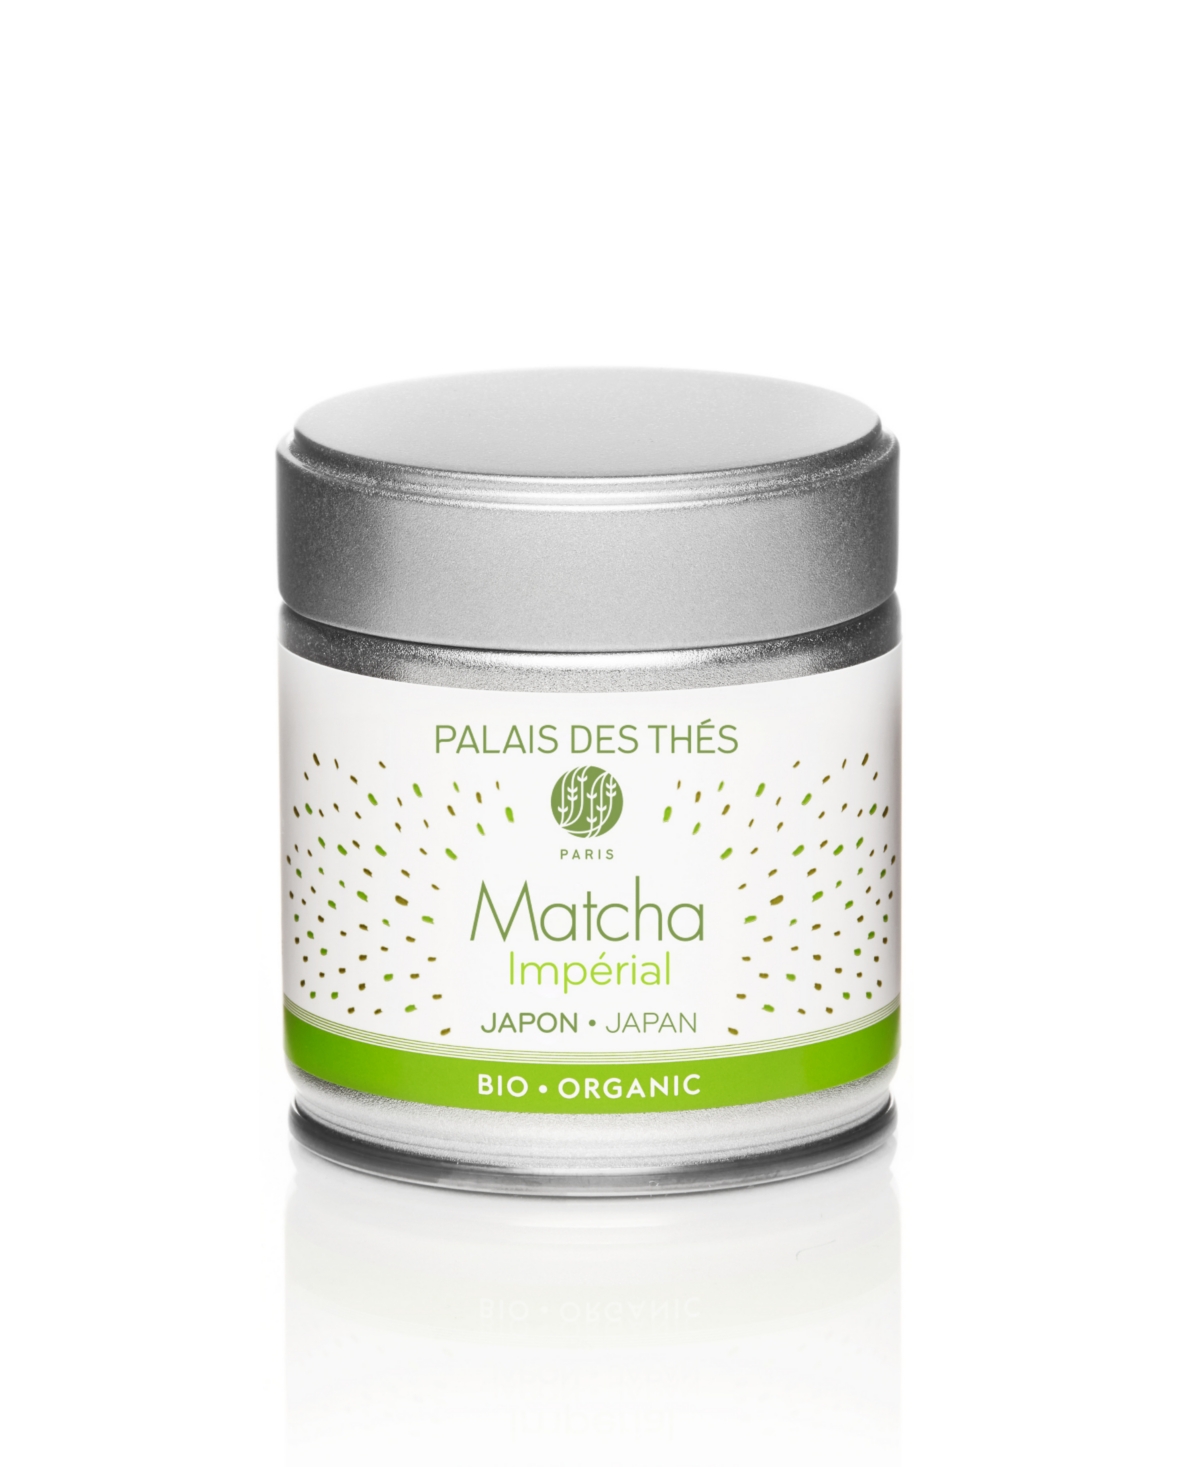 Palais Des Thes Matcha Imperial In Metal Canister, 0.7 oz In No Color